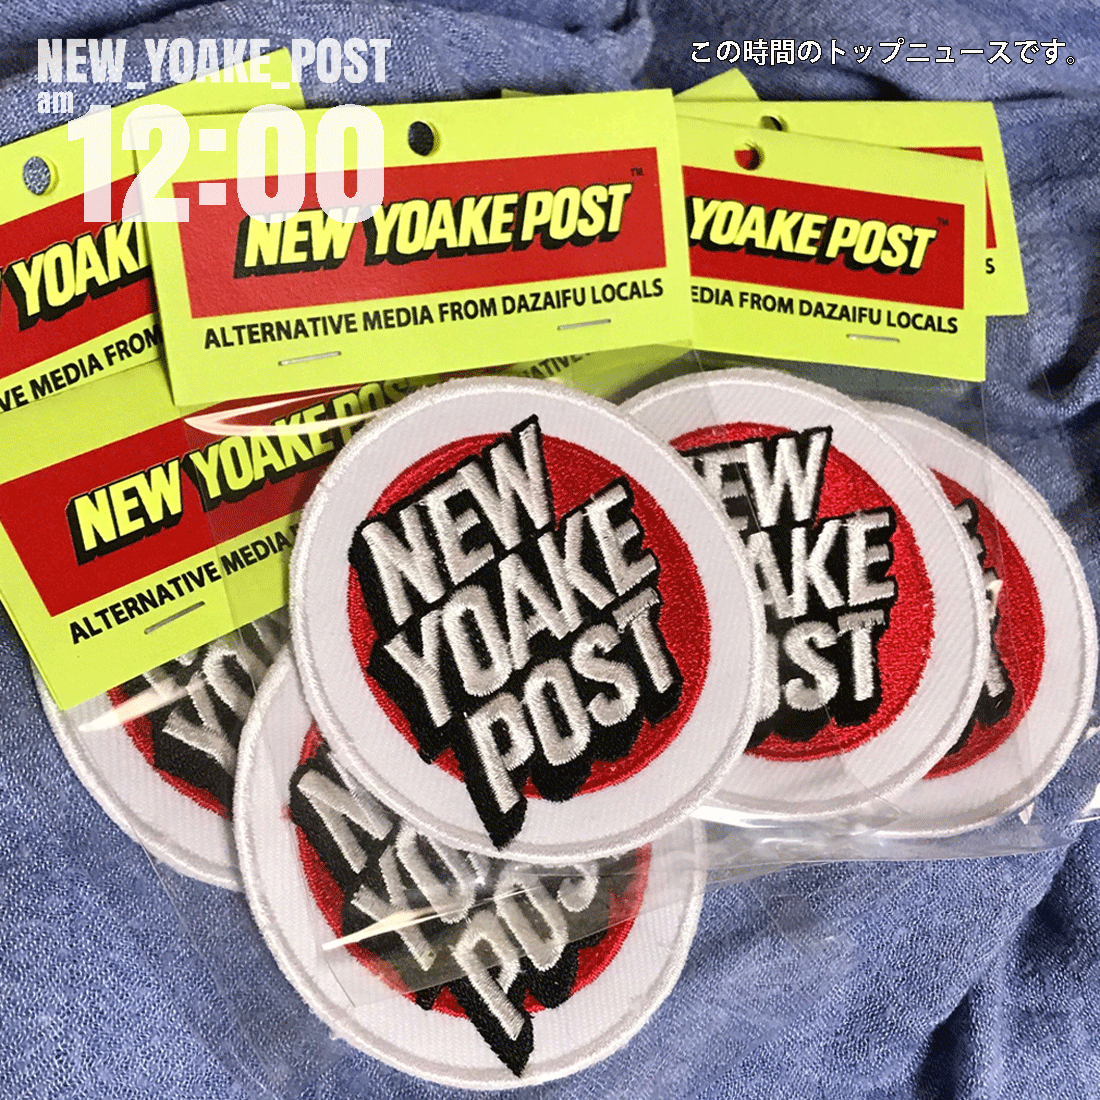 NEW YOAKE POST OFFICIAL GOODS Wappen